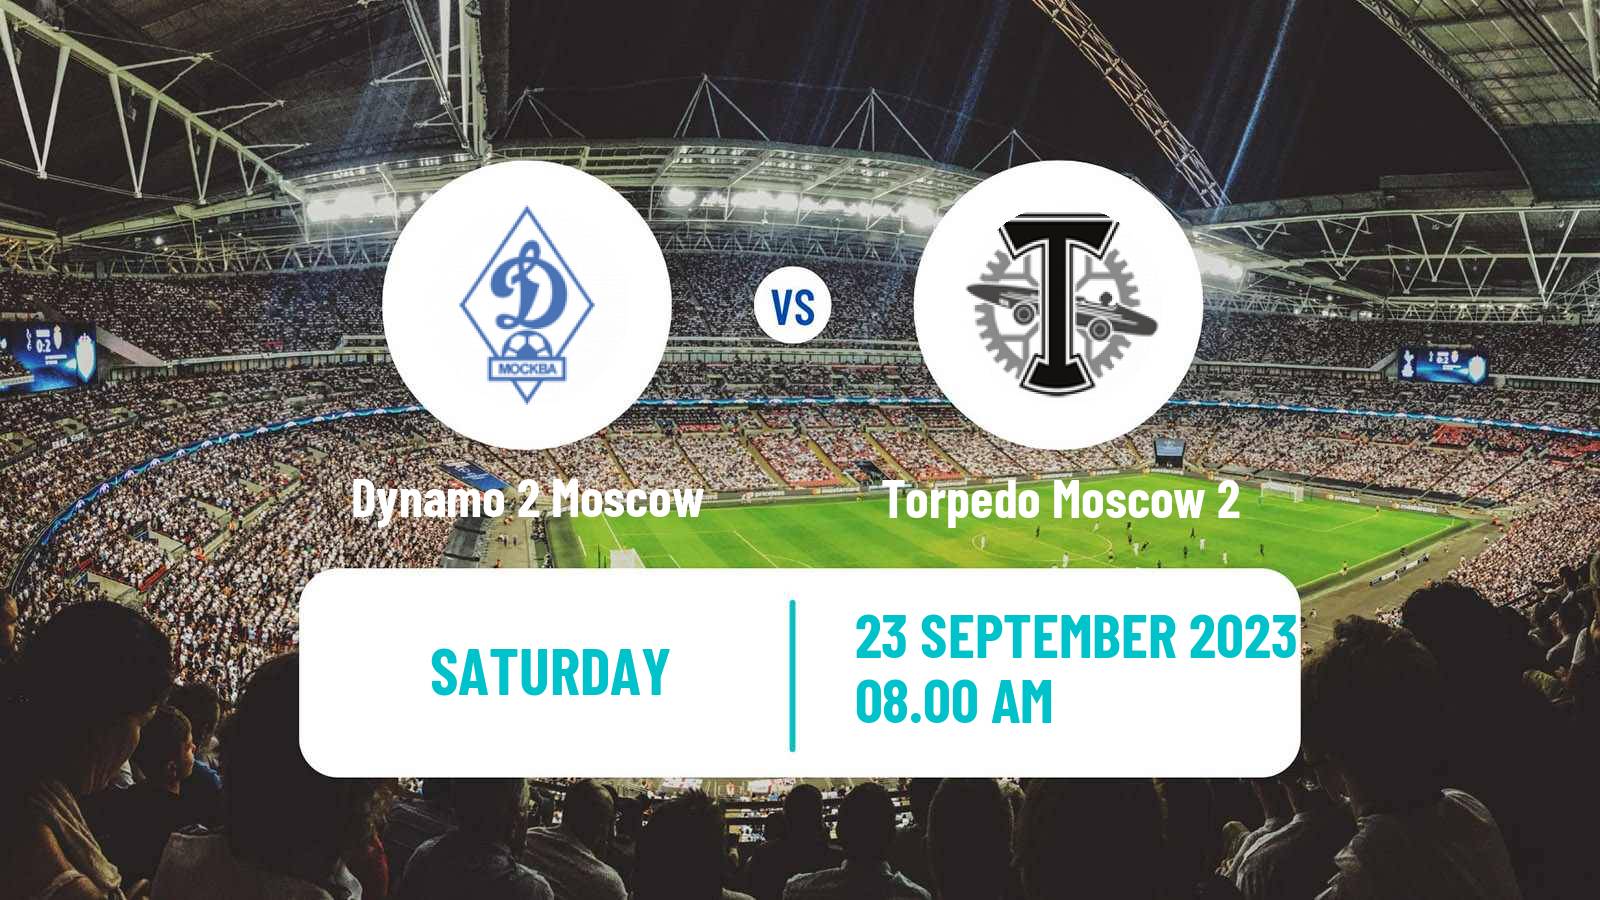 Soccer FNL 2 Division B Group 2 Dynamo 2 Moscow - Torpedo Moscow 2